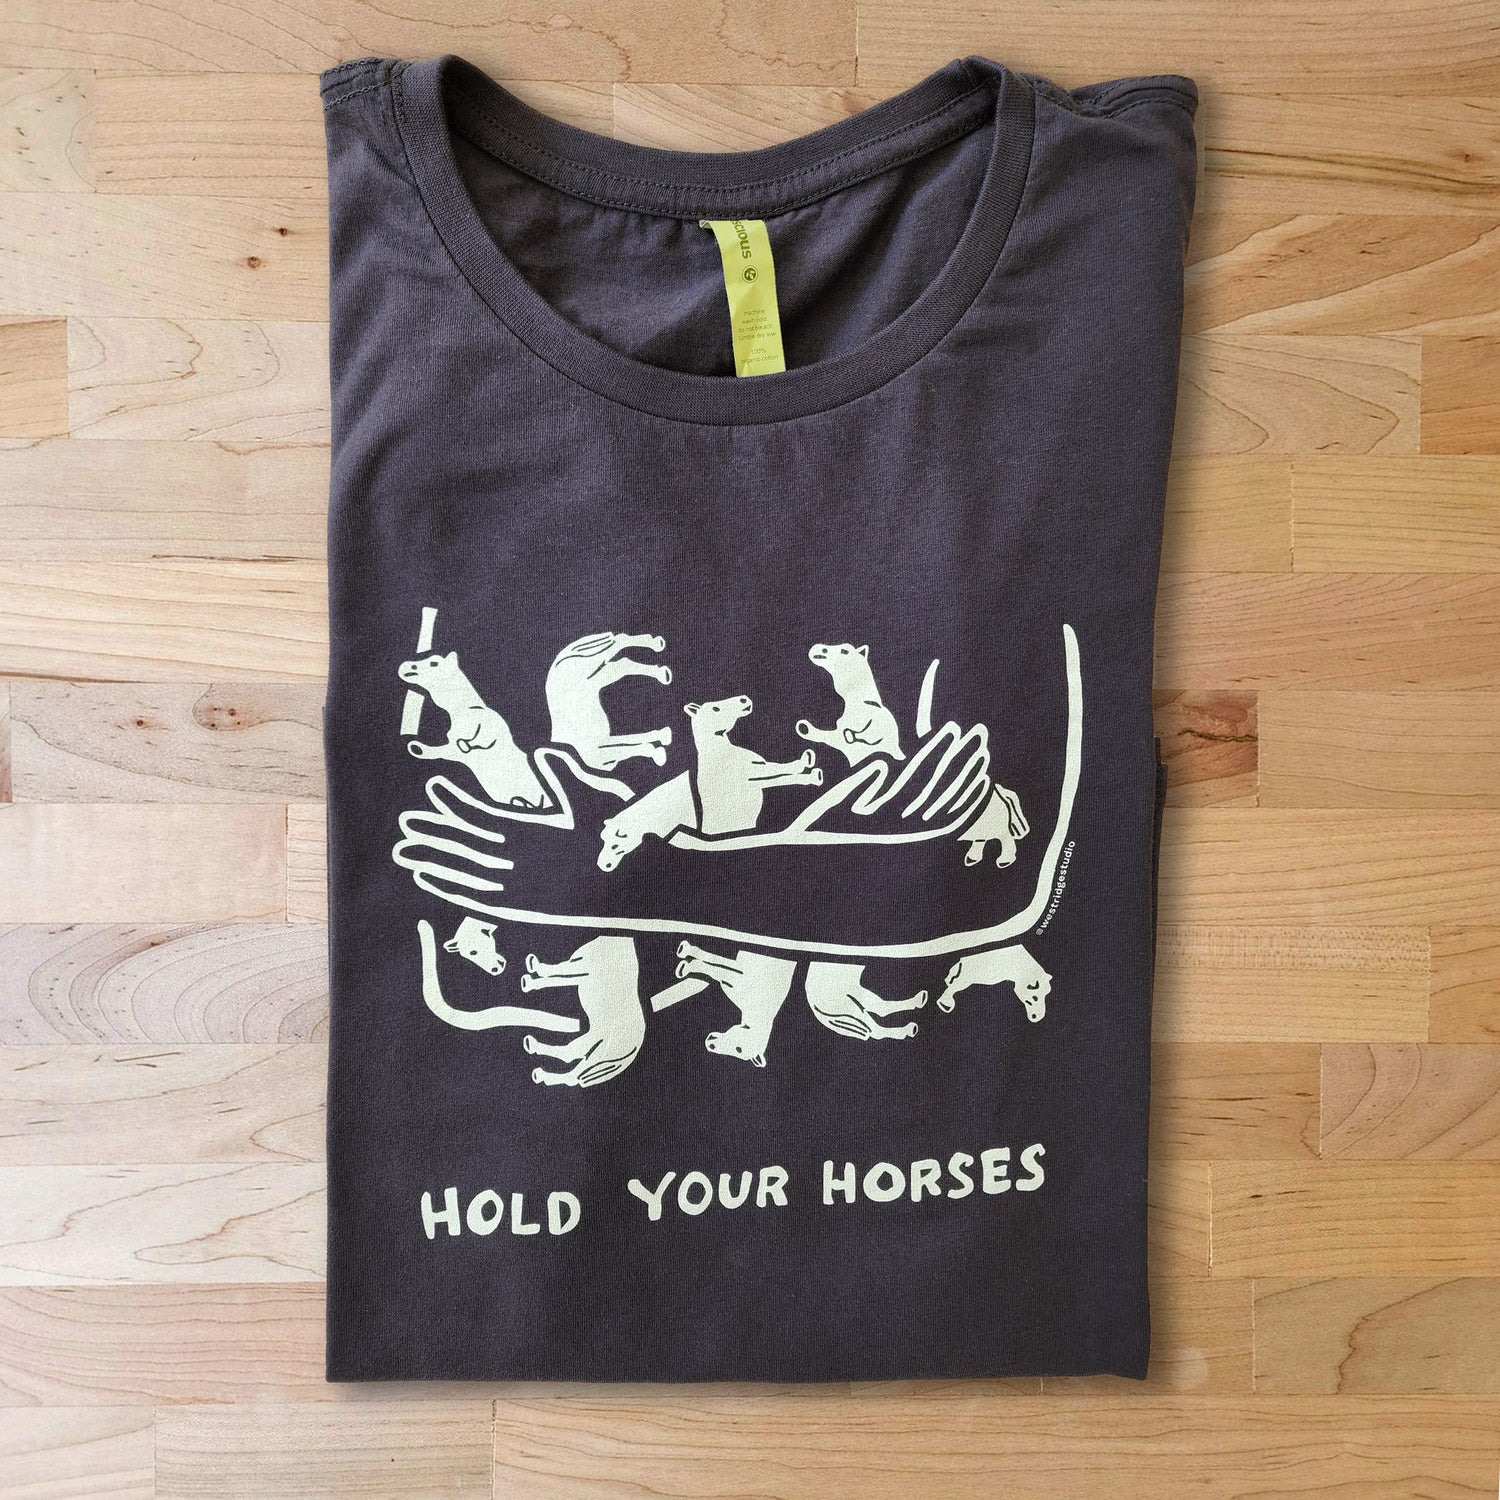 Hold Your Horses eco graphic navy t-shirt for unisex and men's cuts